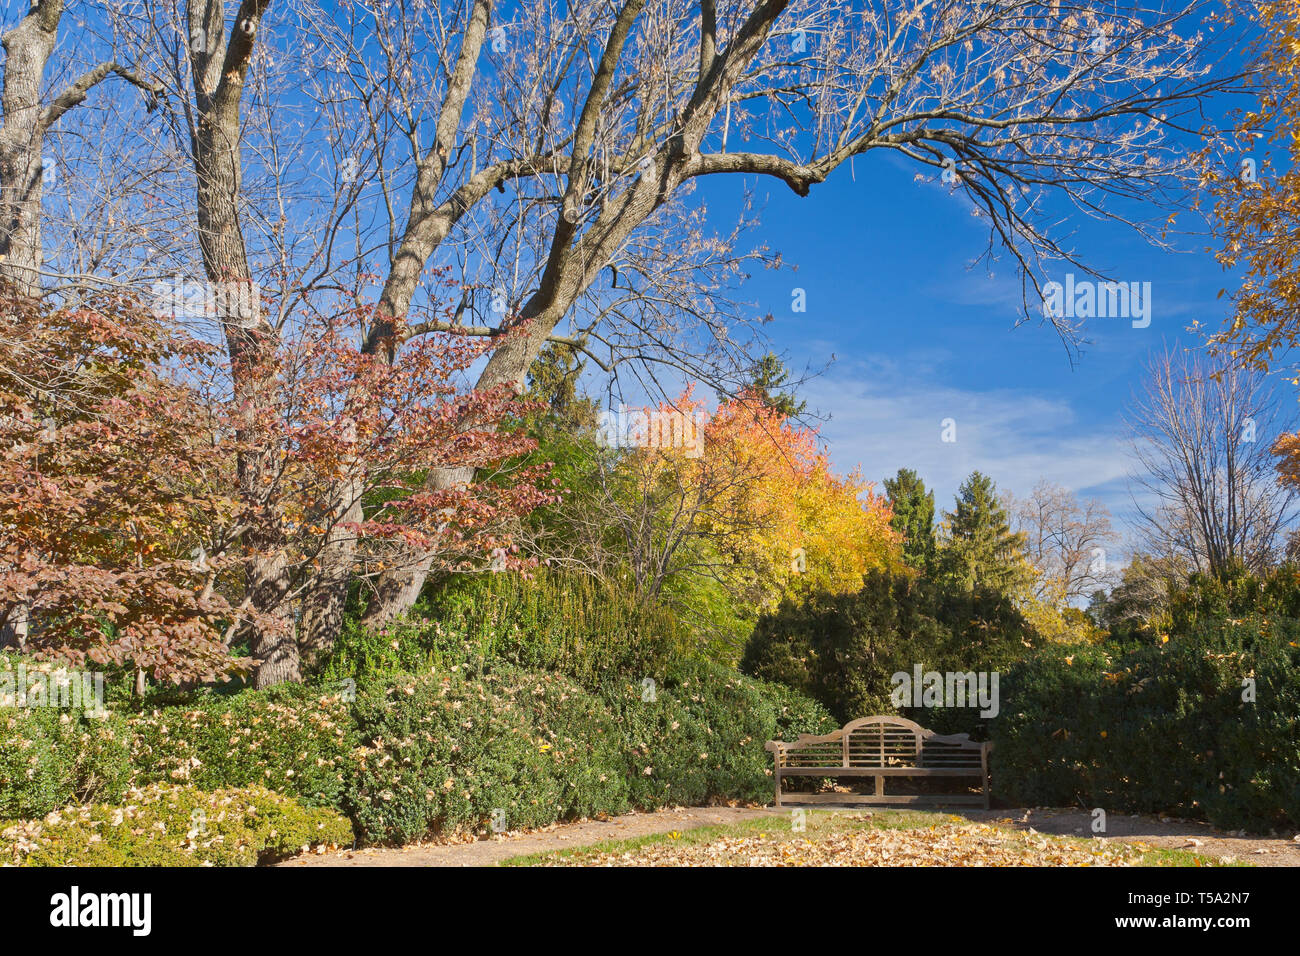 Tranquil autumn scene at the Missouri Botanical Garden with a spindletree in the background. Stock Photo